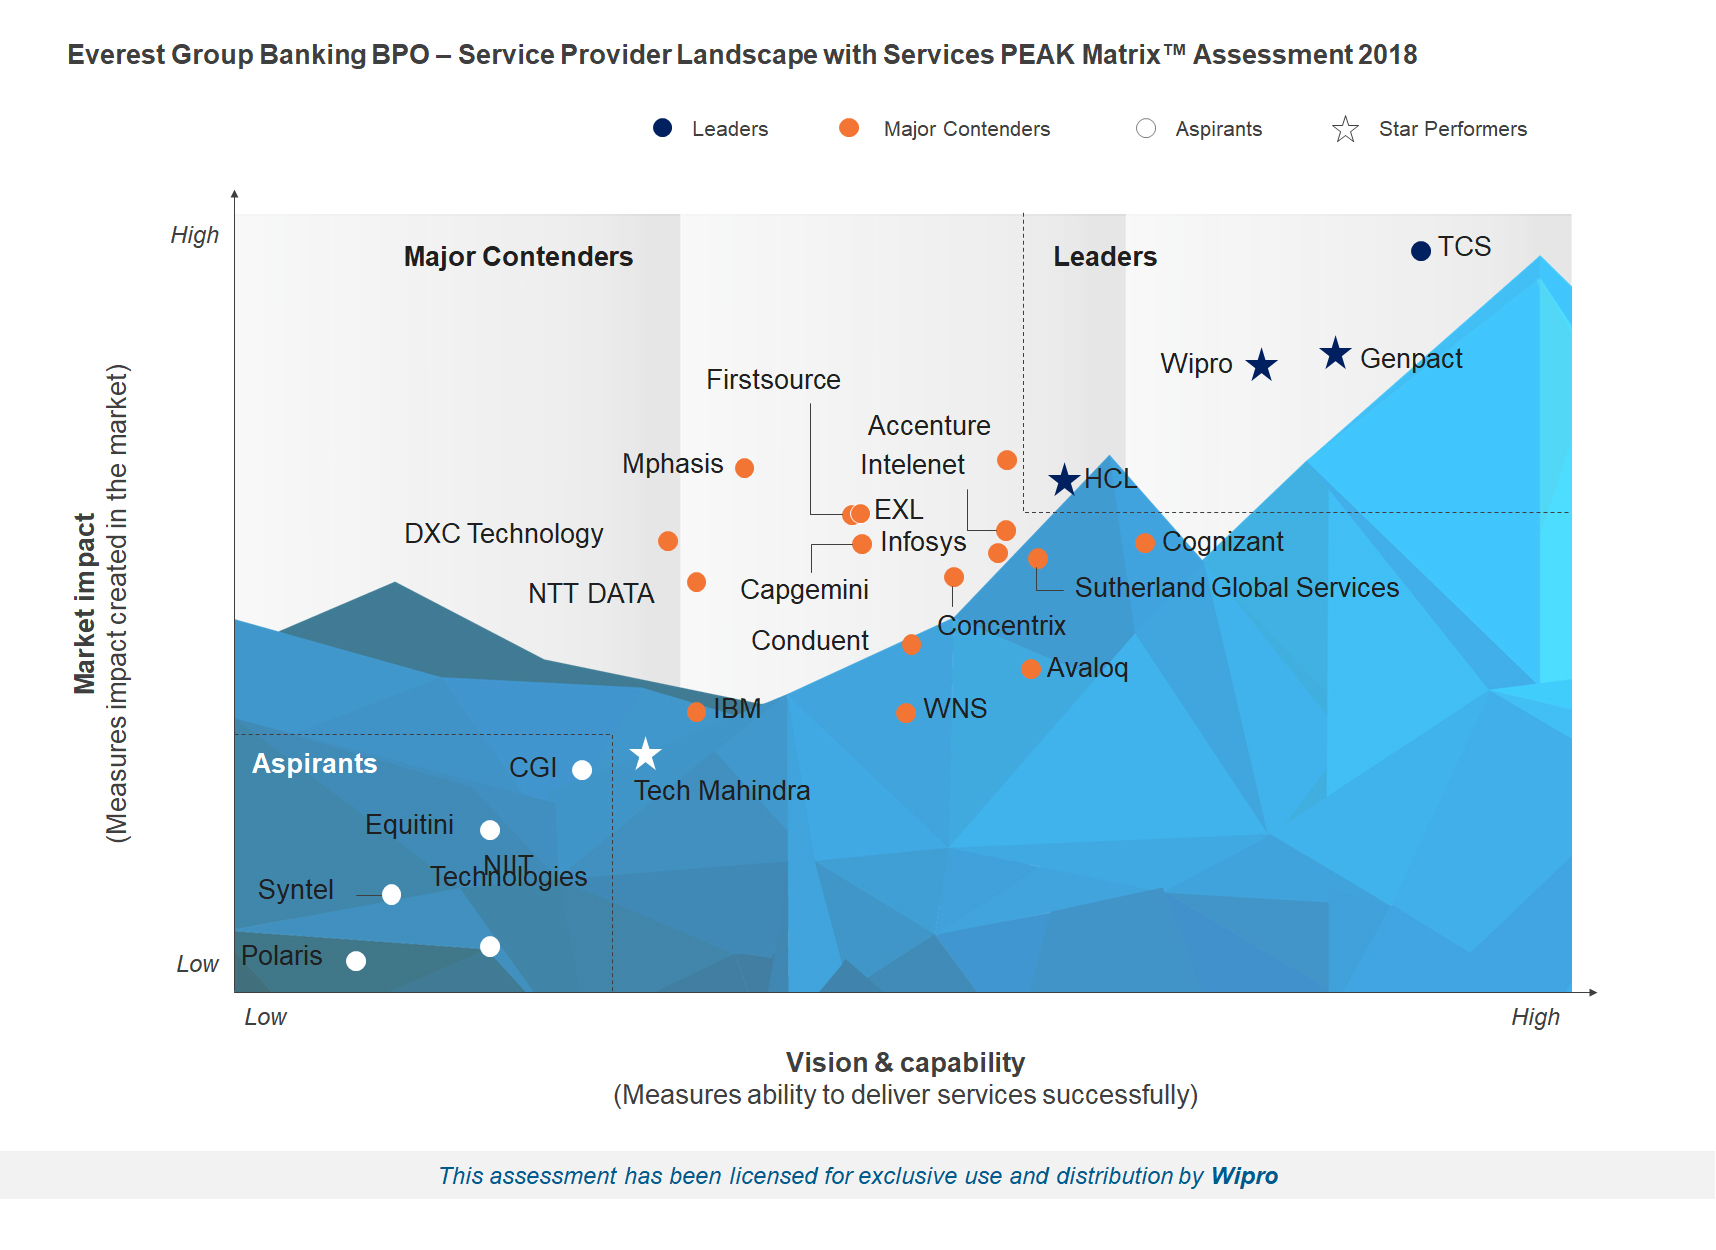 Wipro is a Leader and Star Performer in the Everest Group’s Banking BPO – Service Provider Landscape with services PEAK Matrix™ Assessment 2018